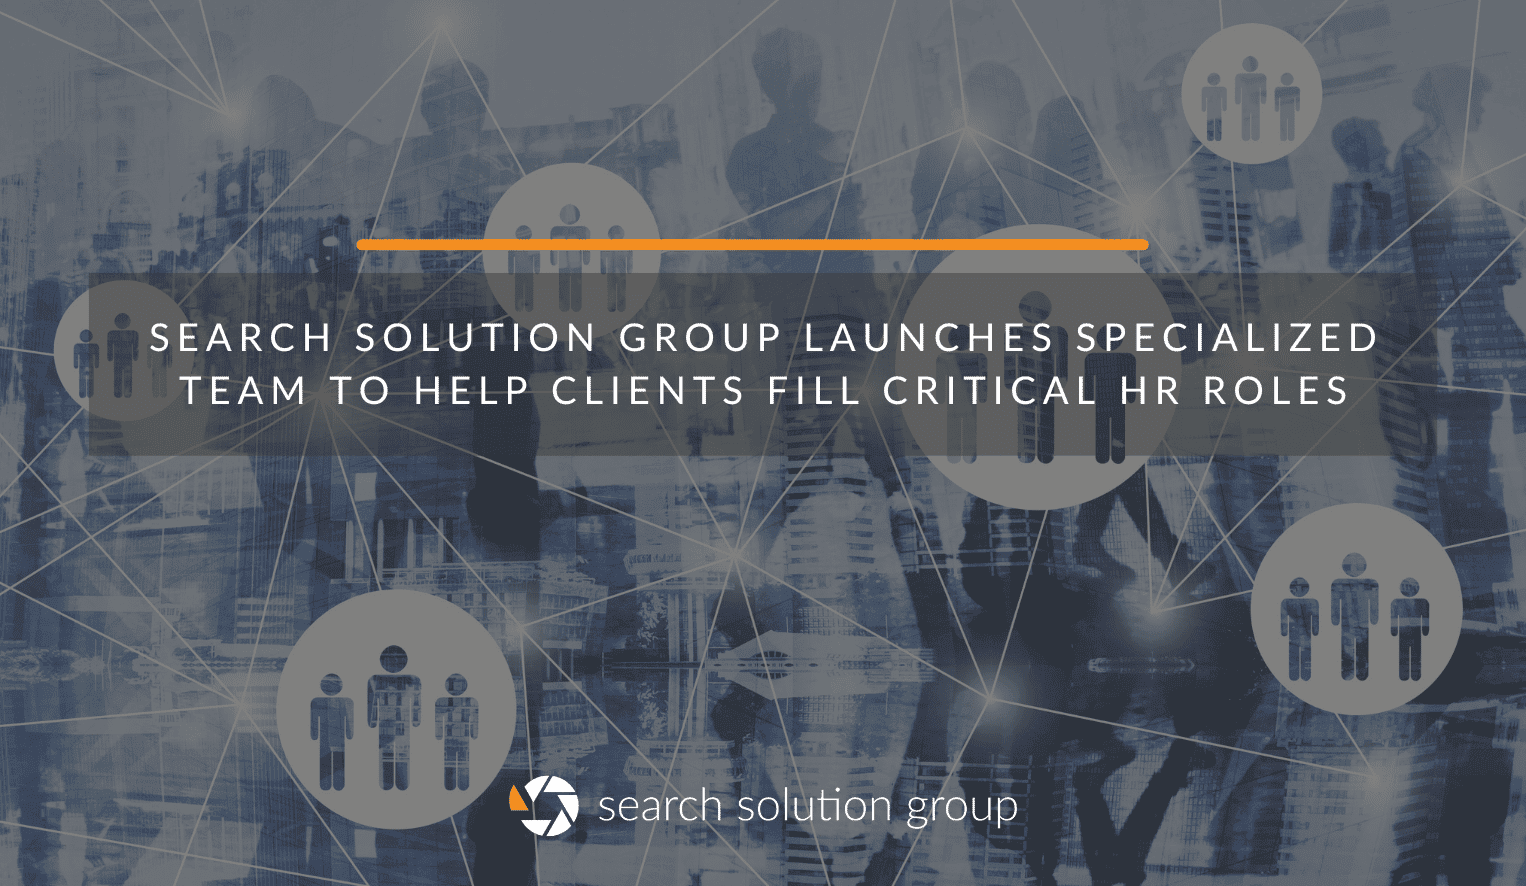 Search Solution Group Launches Specialized Team to Help Clients Fill Critical HR Roles